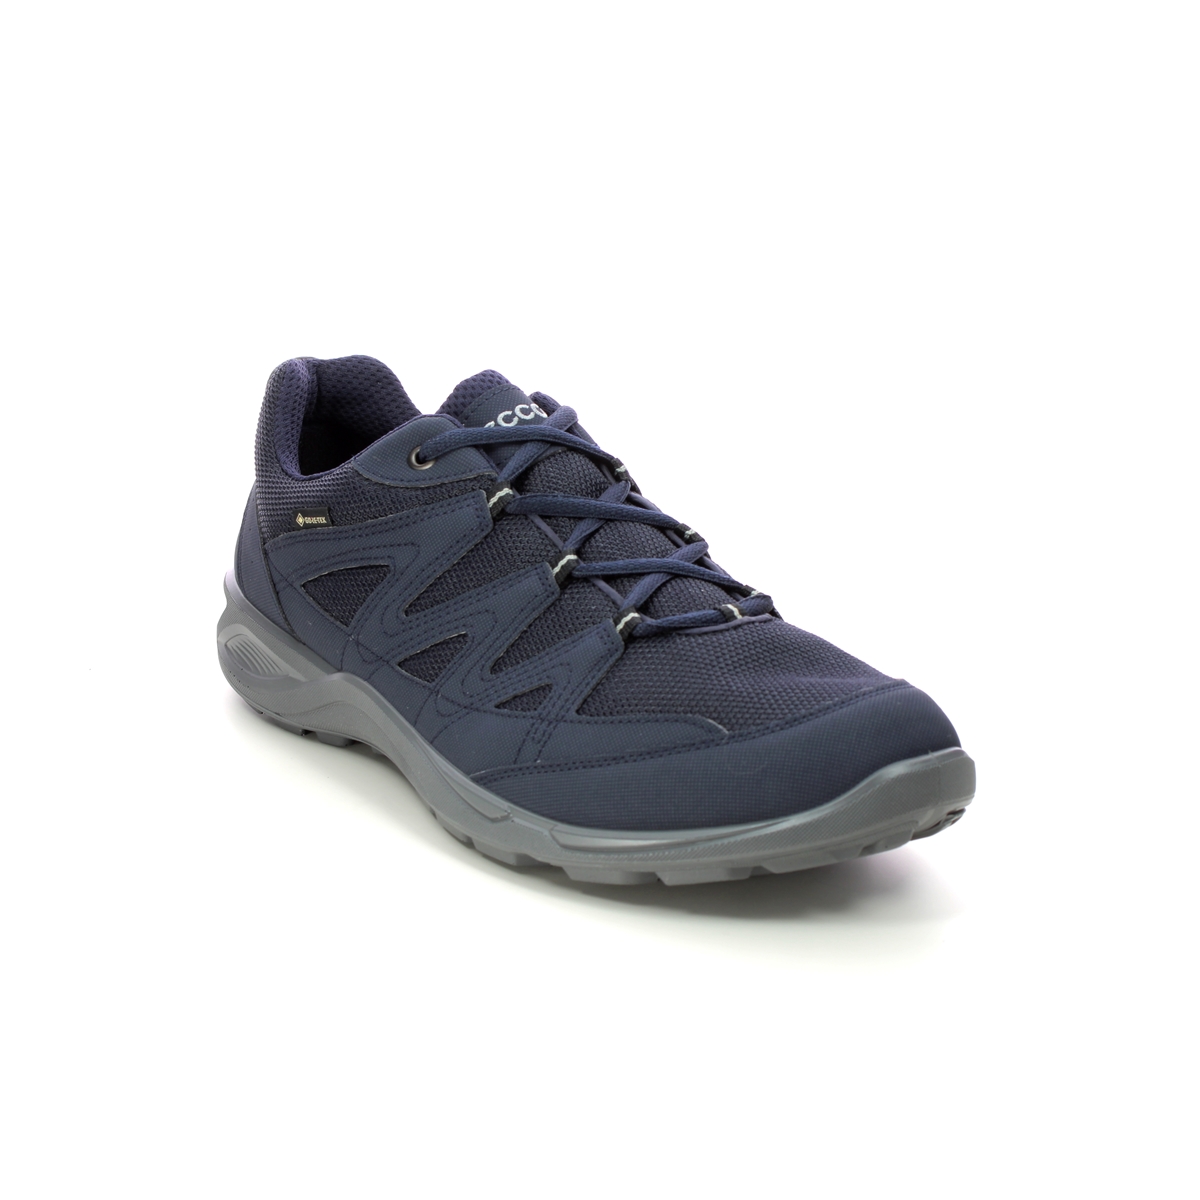 Ecco Terracruise Light Gtx Mens Navy Mens Trainers 825784-50769 In Size 45 In Plain Navy